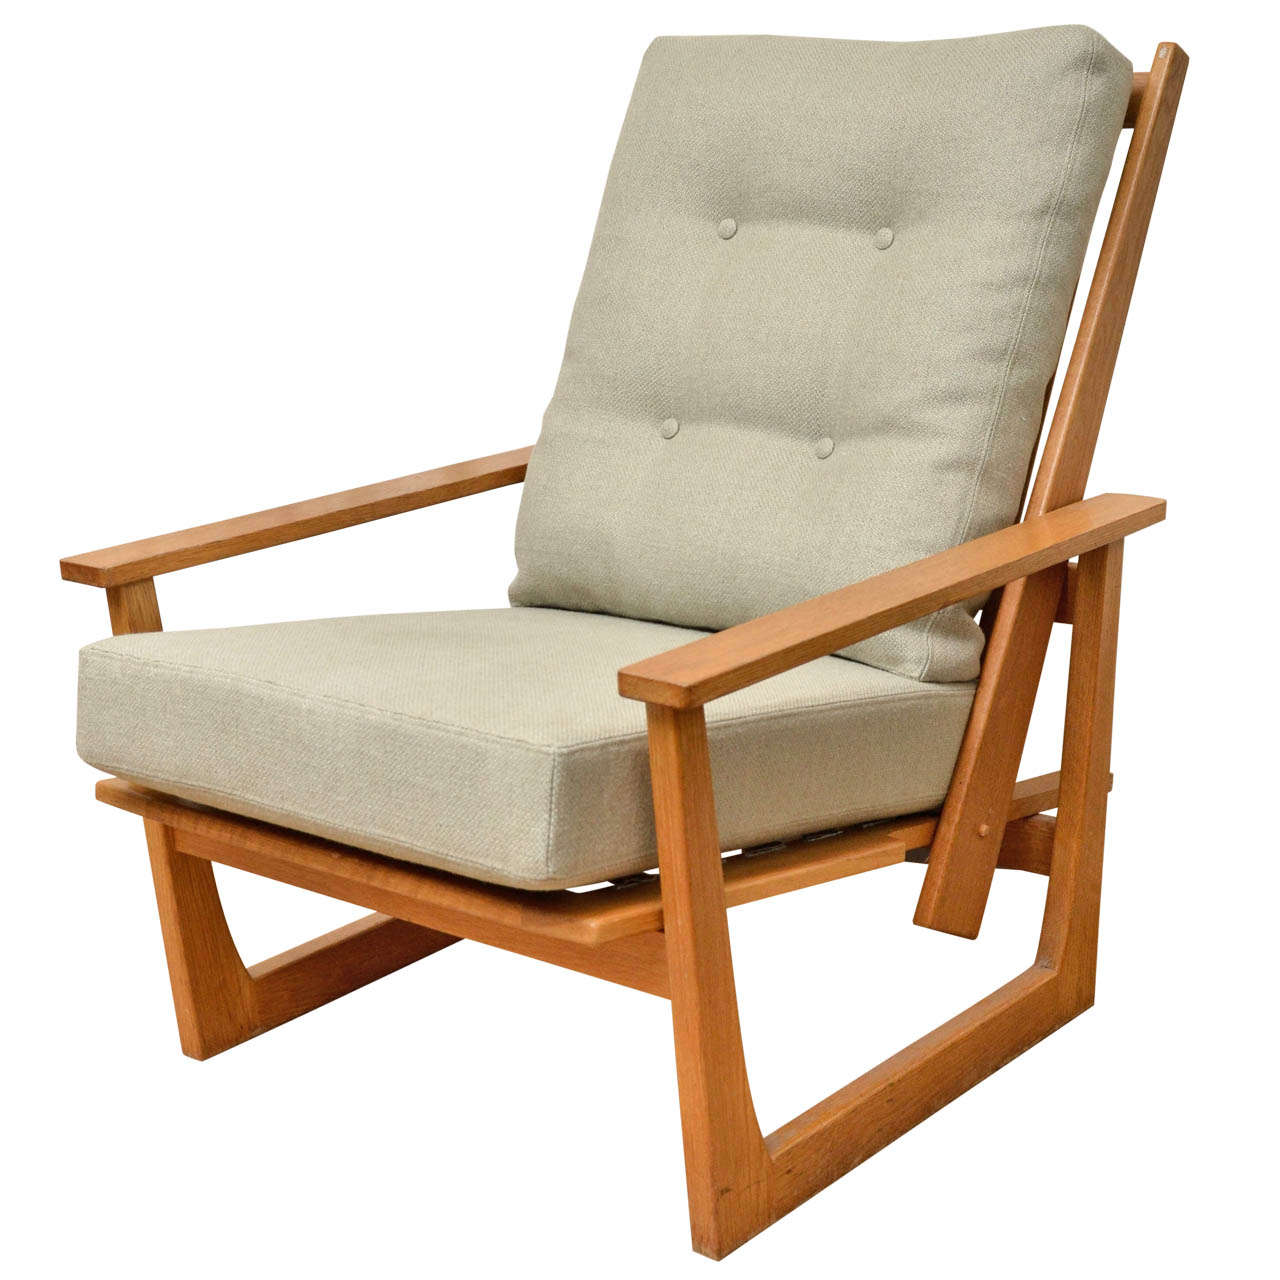 Reclining Wooden Lounge Chair at 1stdibs